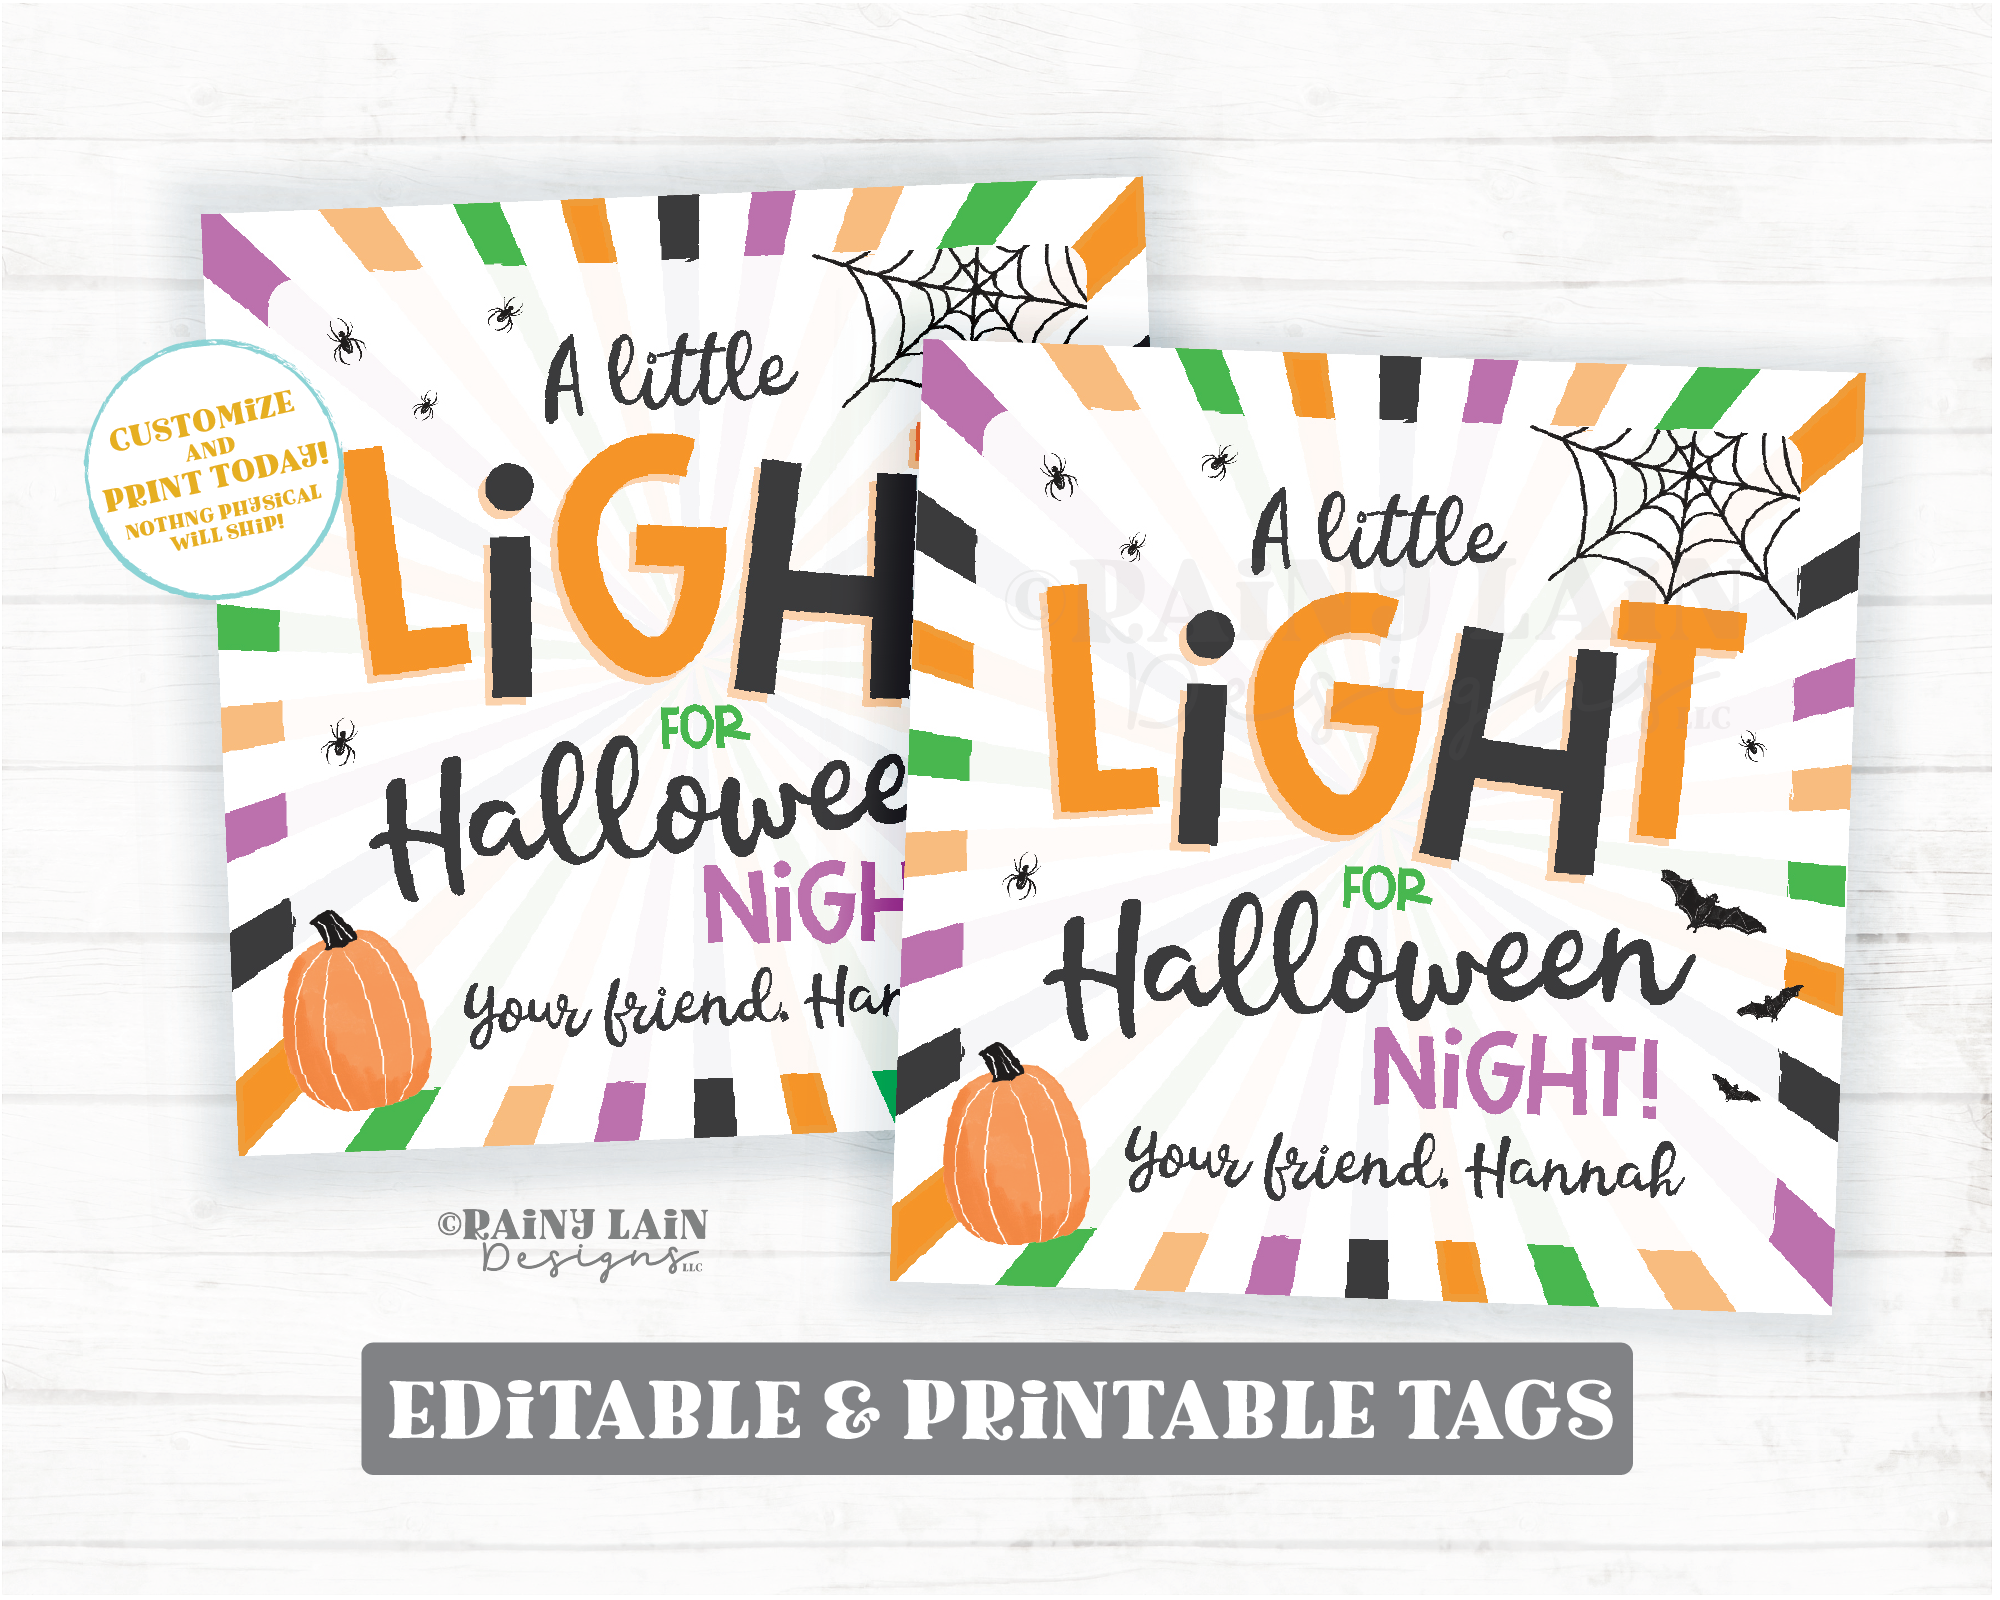 A little Light for Halloween Night Glow Stick Party Favor Tags Halloween Trick or Treat Tags Favor Glow From Teacher Student Classroom PTO